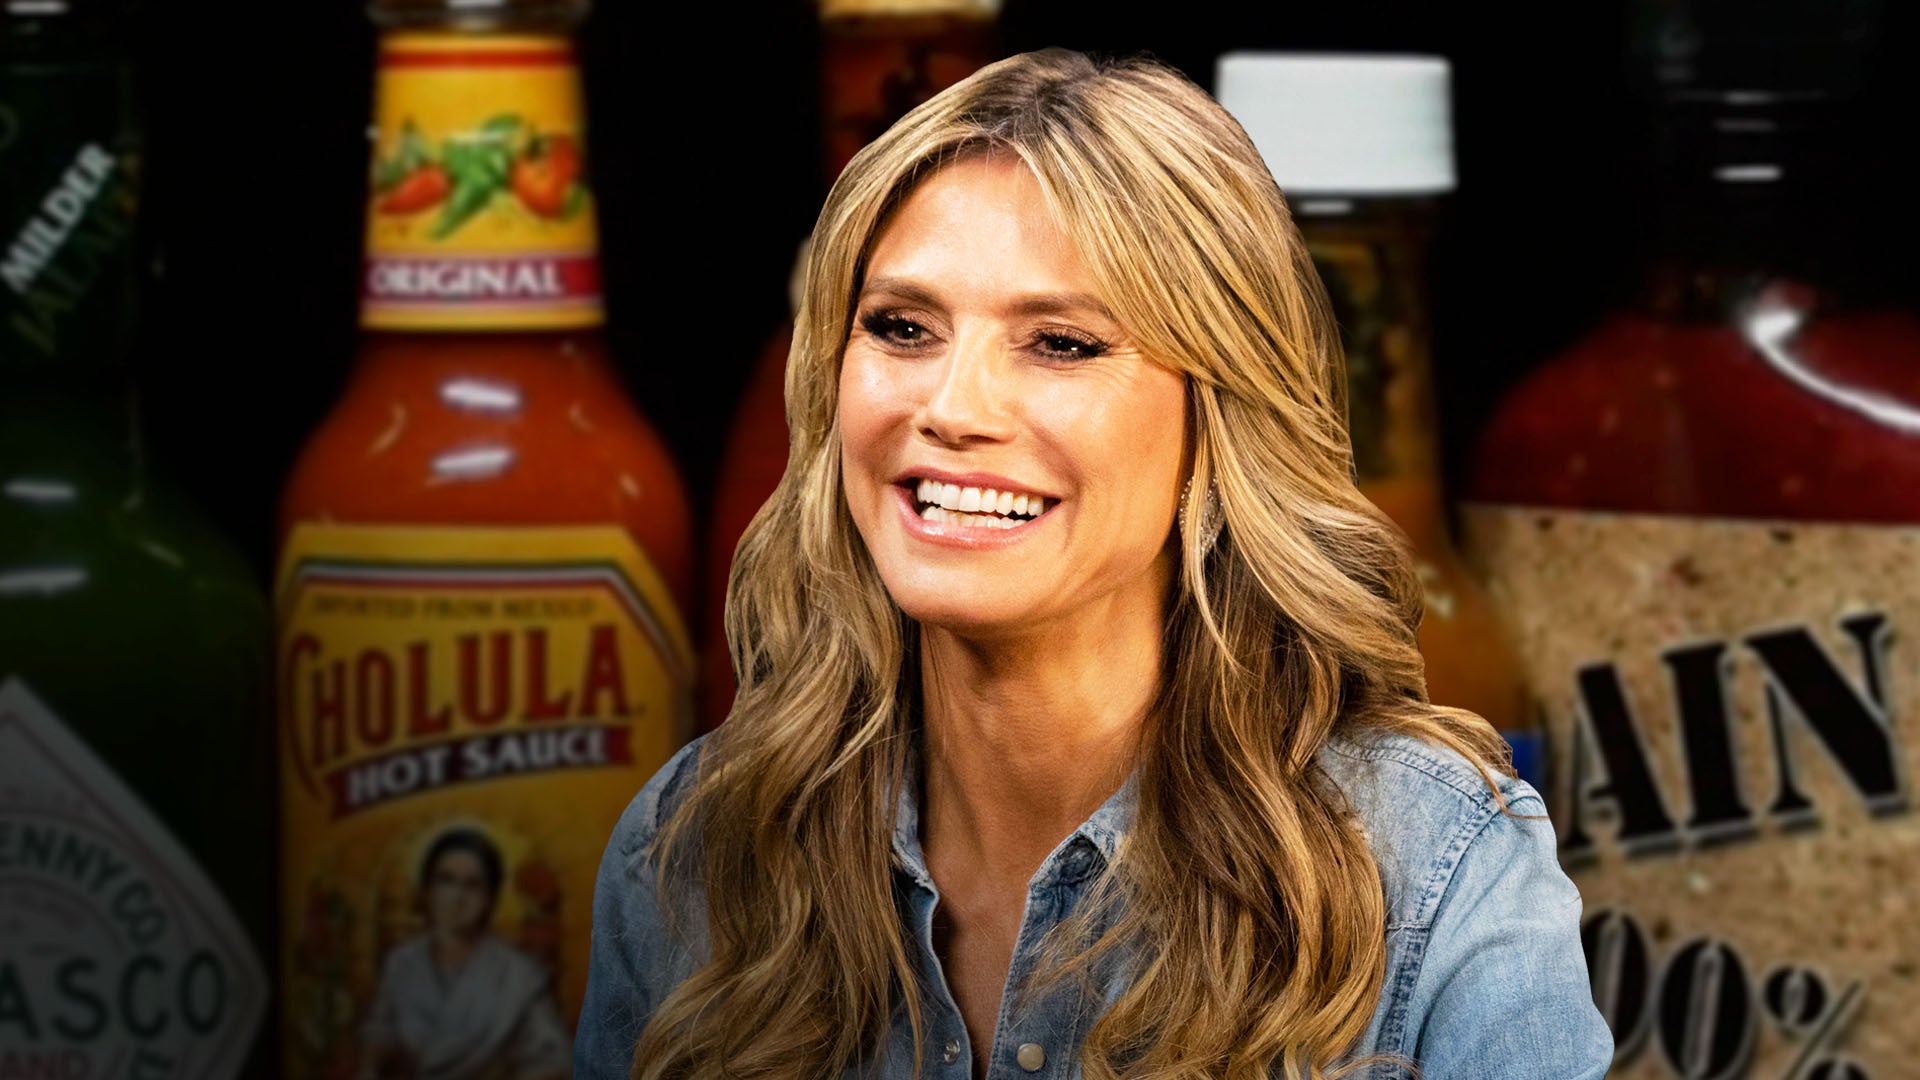 Heidi Klum Strikes a Pose While Eating Spicy Wings